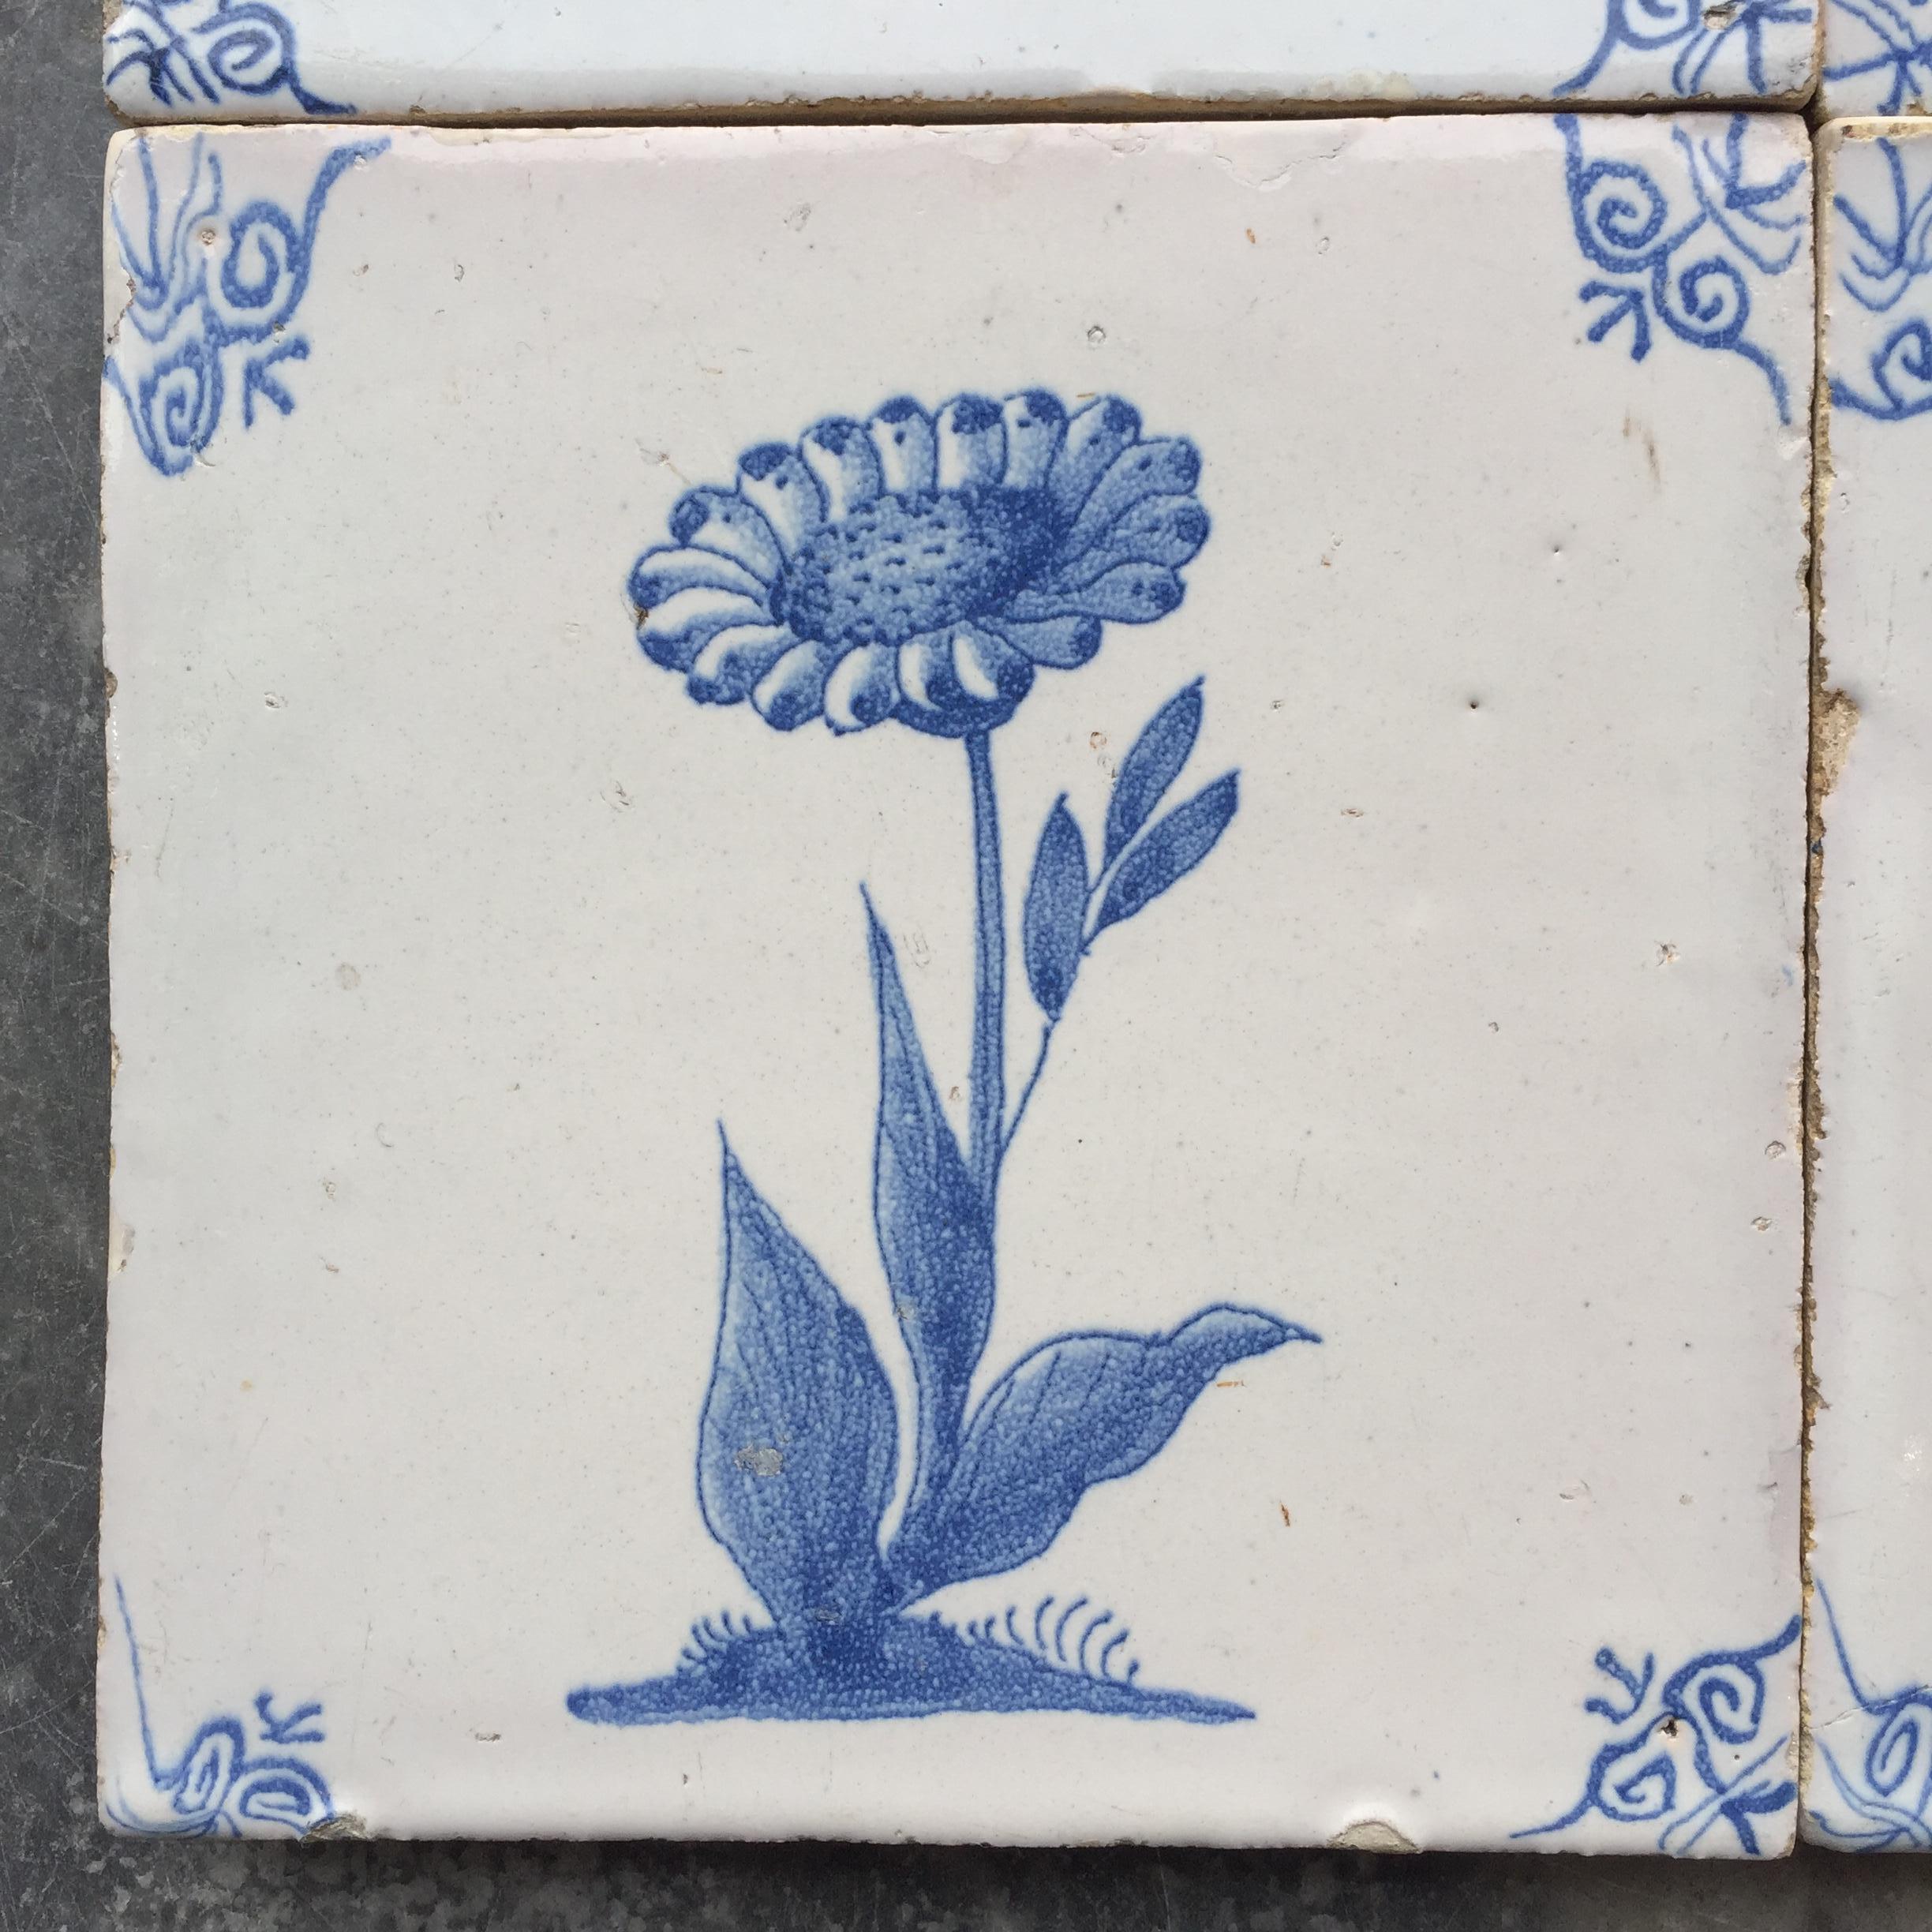 Rare Set of 12 Dutch Delft Tiles with Flowers and Insects, 17th Century 9